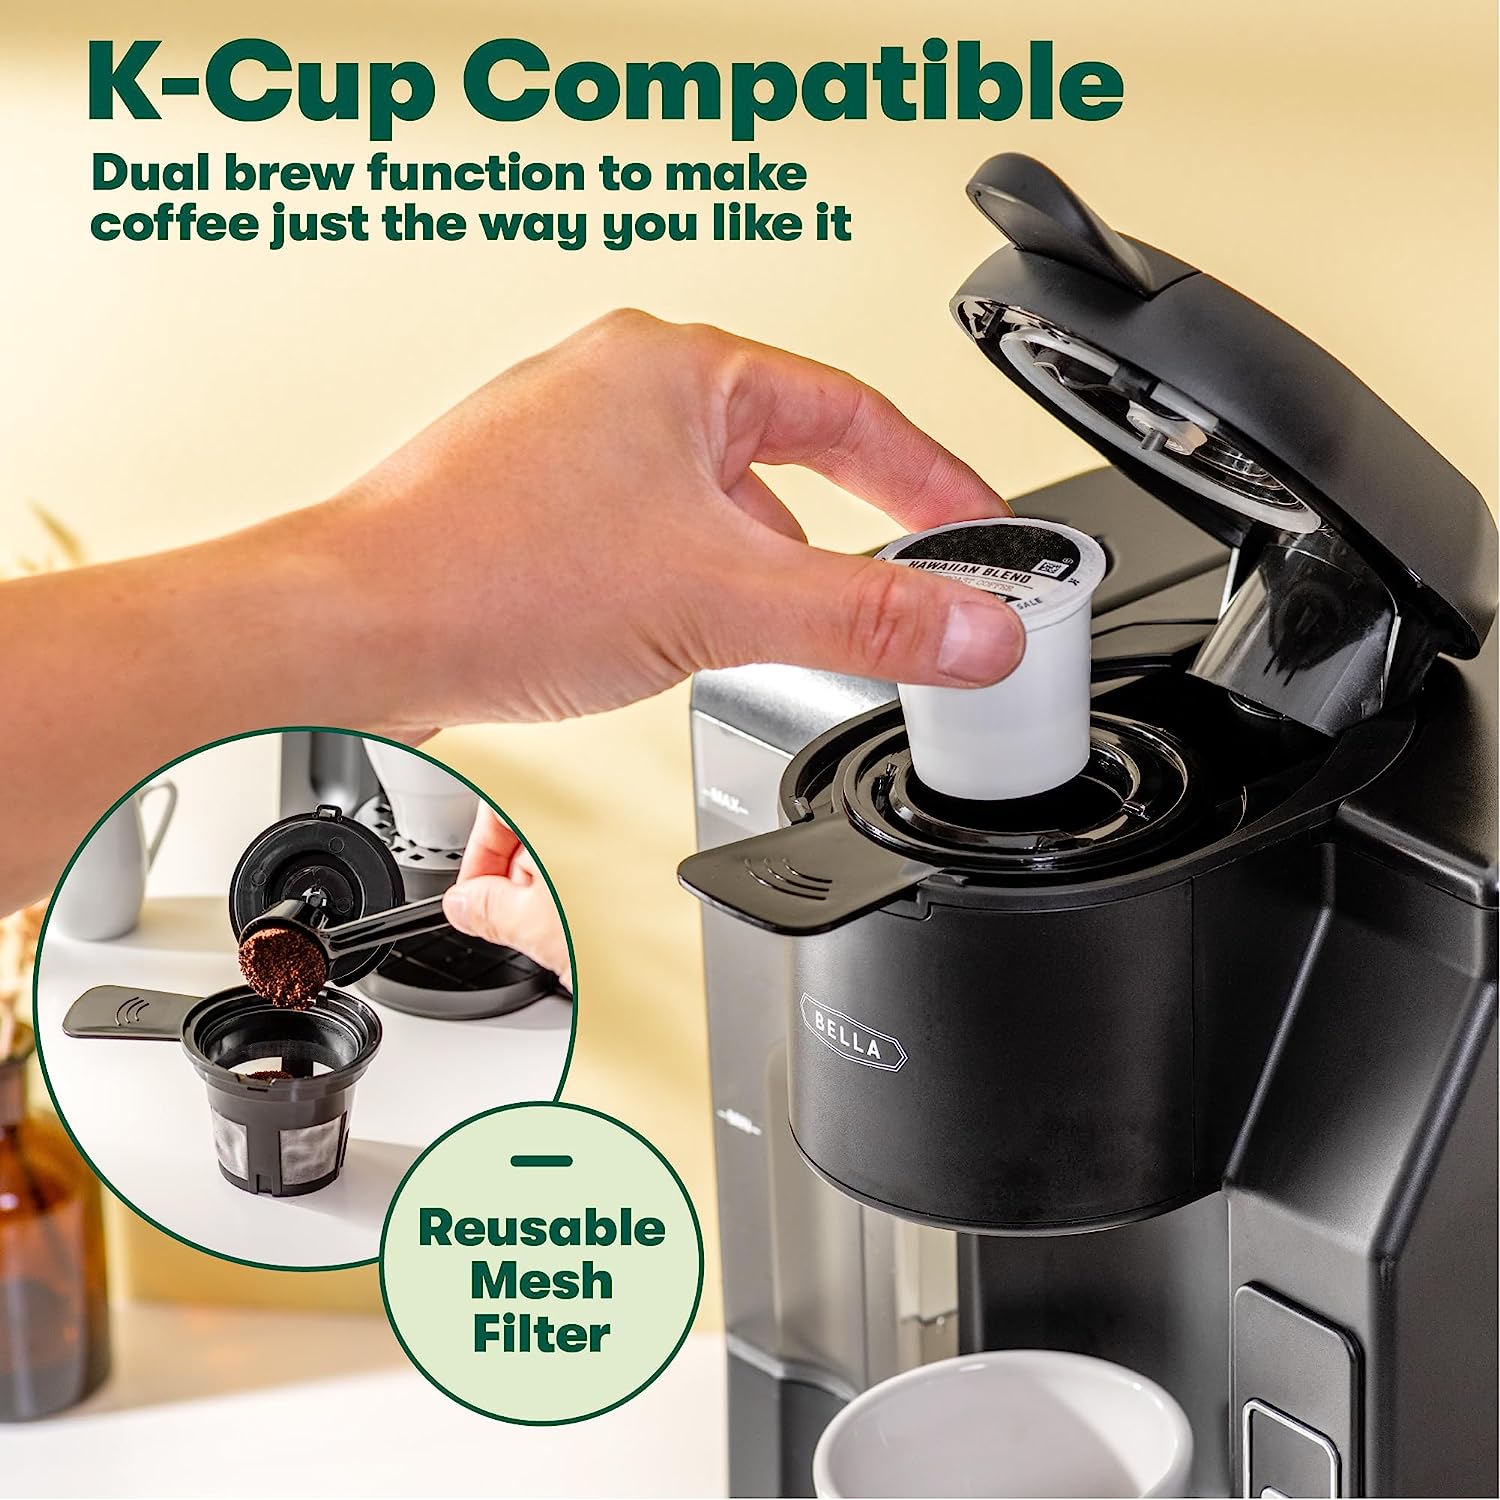 https://bigbigmart.com/wp-content/uploads/2023/07/BELLA-Single-Serve-Coffee-Maker-Dual-Brew-K-cup-Compatible-Ground-Coffee-Brewer-with-Removable-Water-Tank-Adjustable-Drip-Tray-Perfect-for-Travel3.jpg